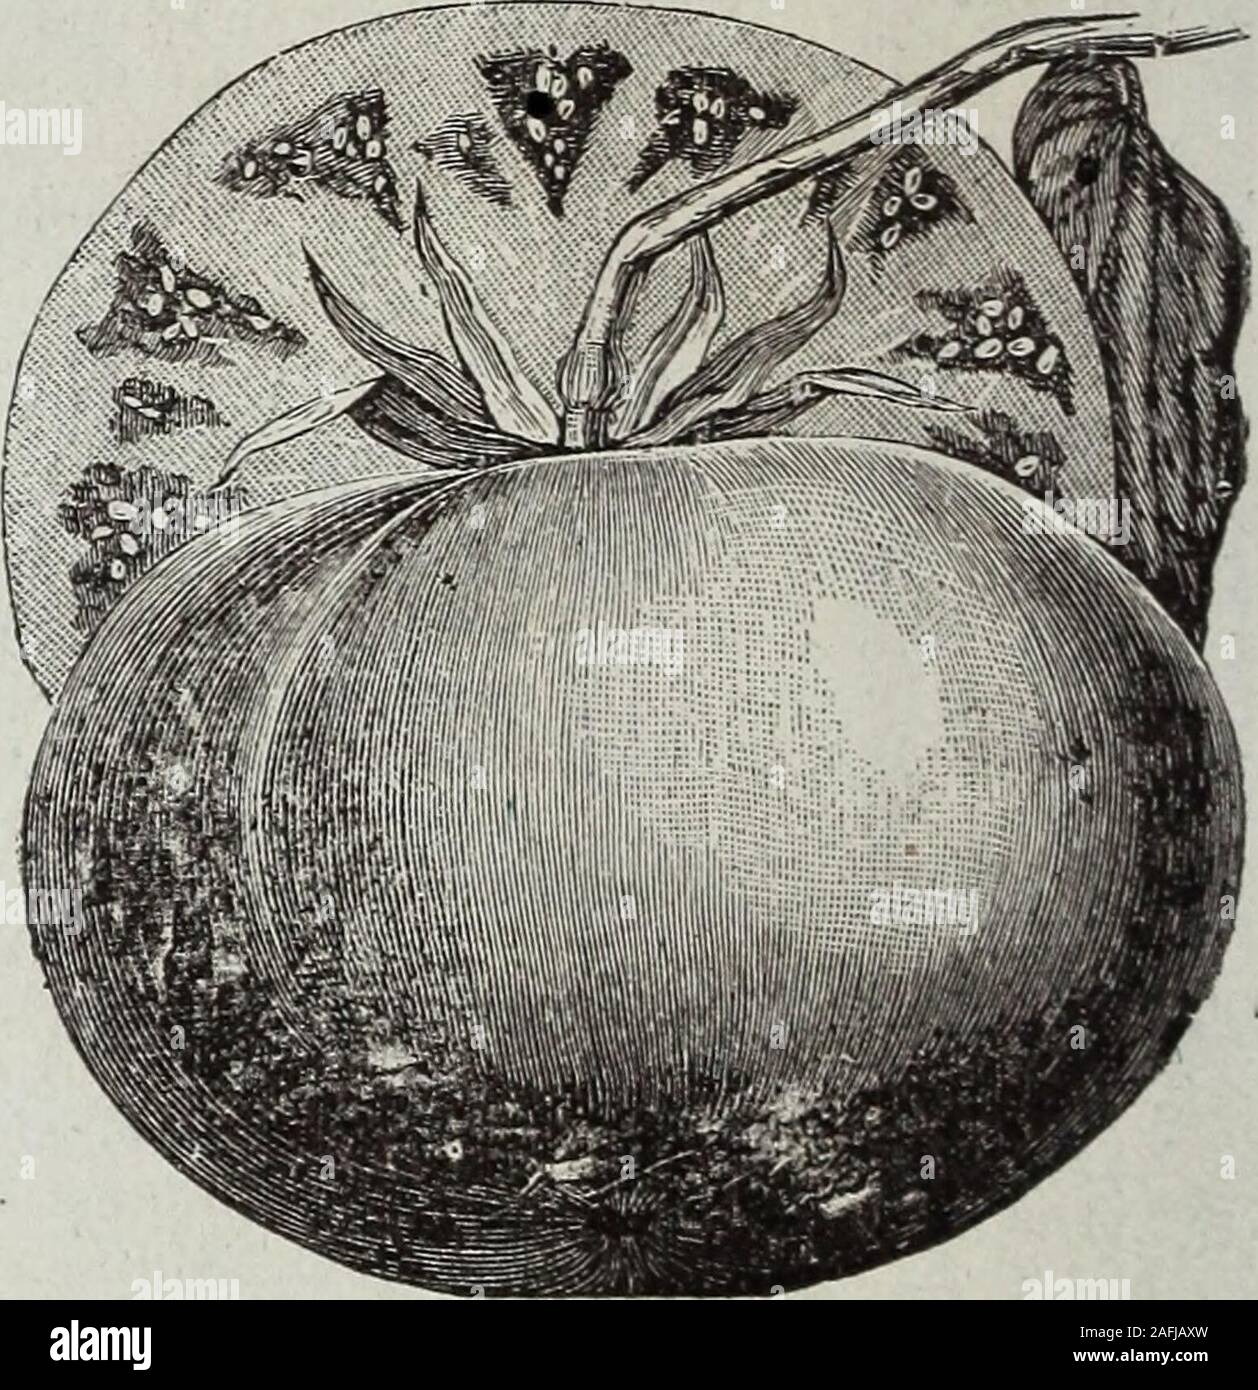 . Cole's garden annual. ality. Be-ing a hybrid it produces little seed, sometimes-only one seed to a fruit. From its compact habitit will make a fine pot plant, and no doubt forcereadily and profitably. All growers should try itPer pkt., 10 cts.; 3 pkts., 25 cts.; oz., 40 cts. IGNOTlJM TOMATO. This variety, which is the result of great pains andand skill, is the nearest perfection of all, either forfamily or market use. It is large, smooth, heavyand solid; of a very deep red handsome color: itripens perfectly up to the stem, and is remarkablyfree from cracking or rotting. The flesh is of thefi Stock Photo